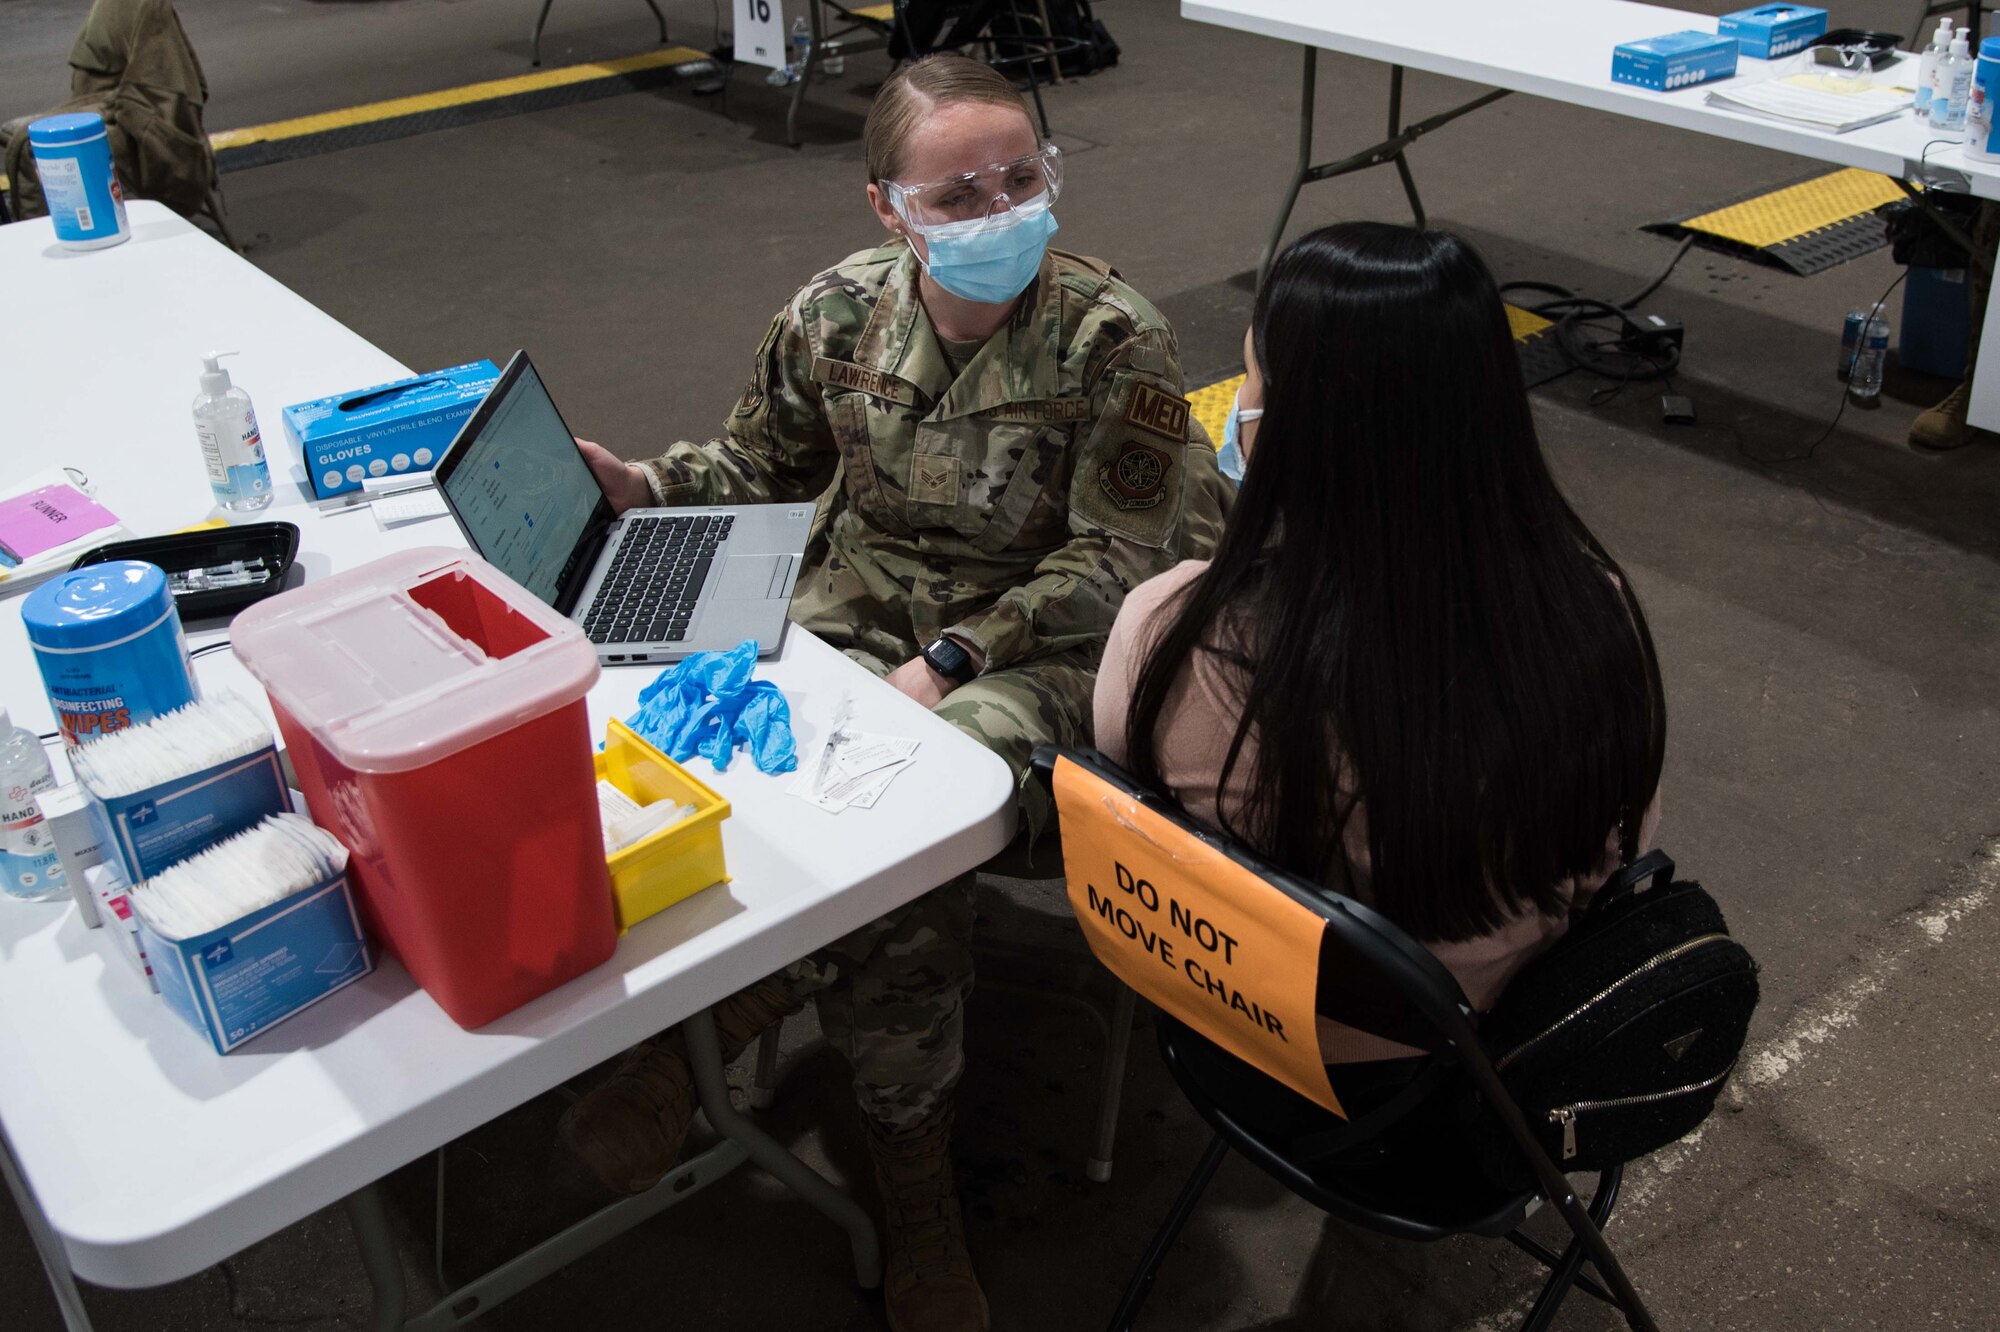 U.S. Air Force Senior Airman Daschia Lawrence, 92nd Healthcare Operation Squadron medical technician, prepares a patient for their COVID-19 vaccine April 27, 2021, at the Community Vaccination Center (CVC) in St. Paul, Minnesota. U.S. Northern Command, through U.S. Army North, remains committed to providing continued Department of Defense support to the Federal Emergency Management Agency as part of the whole-of government response to COVID-19. (U.S. Air Force photo by Senior Airman Alexi Bosarge)